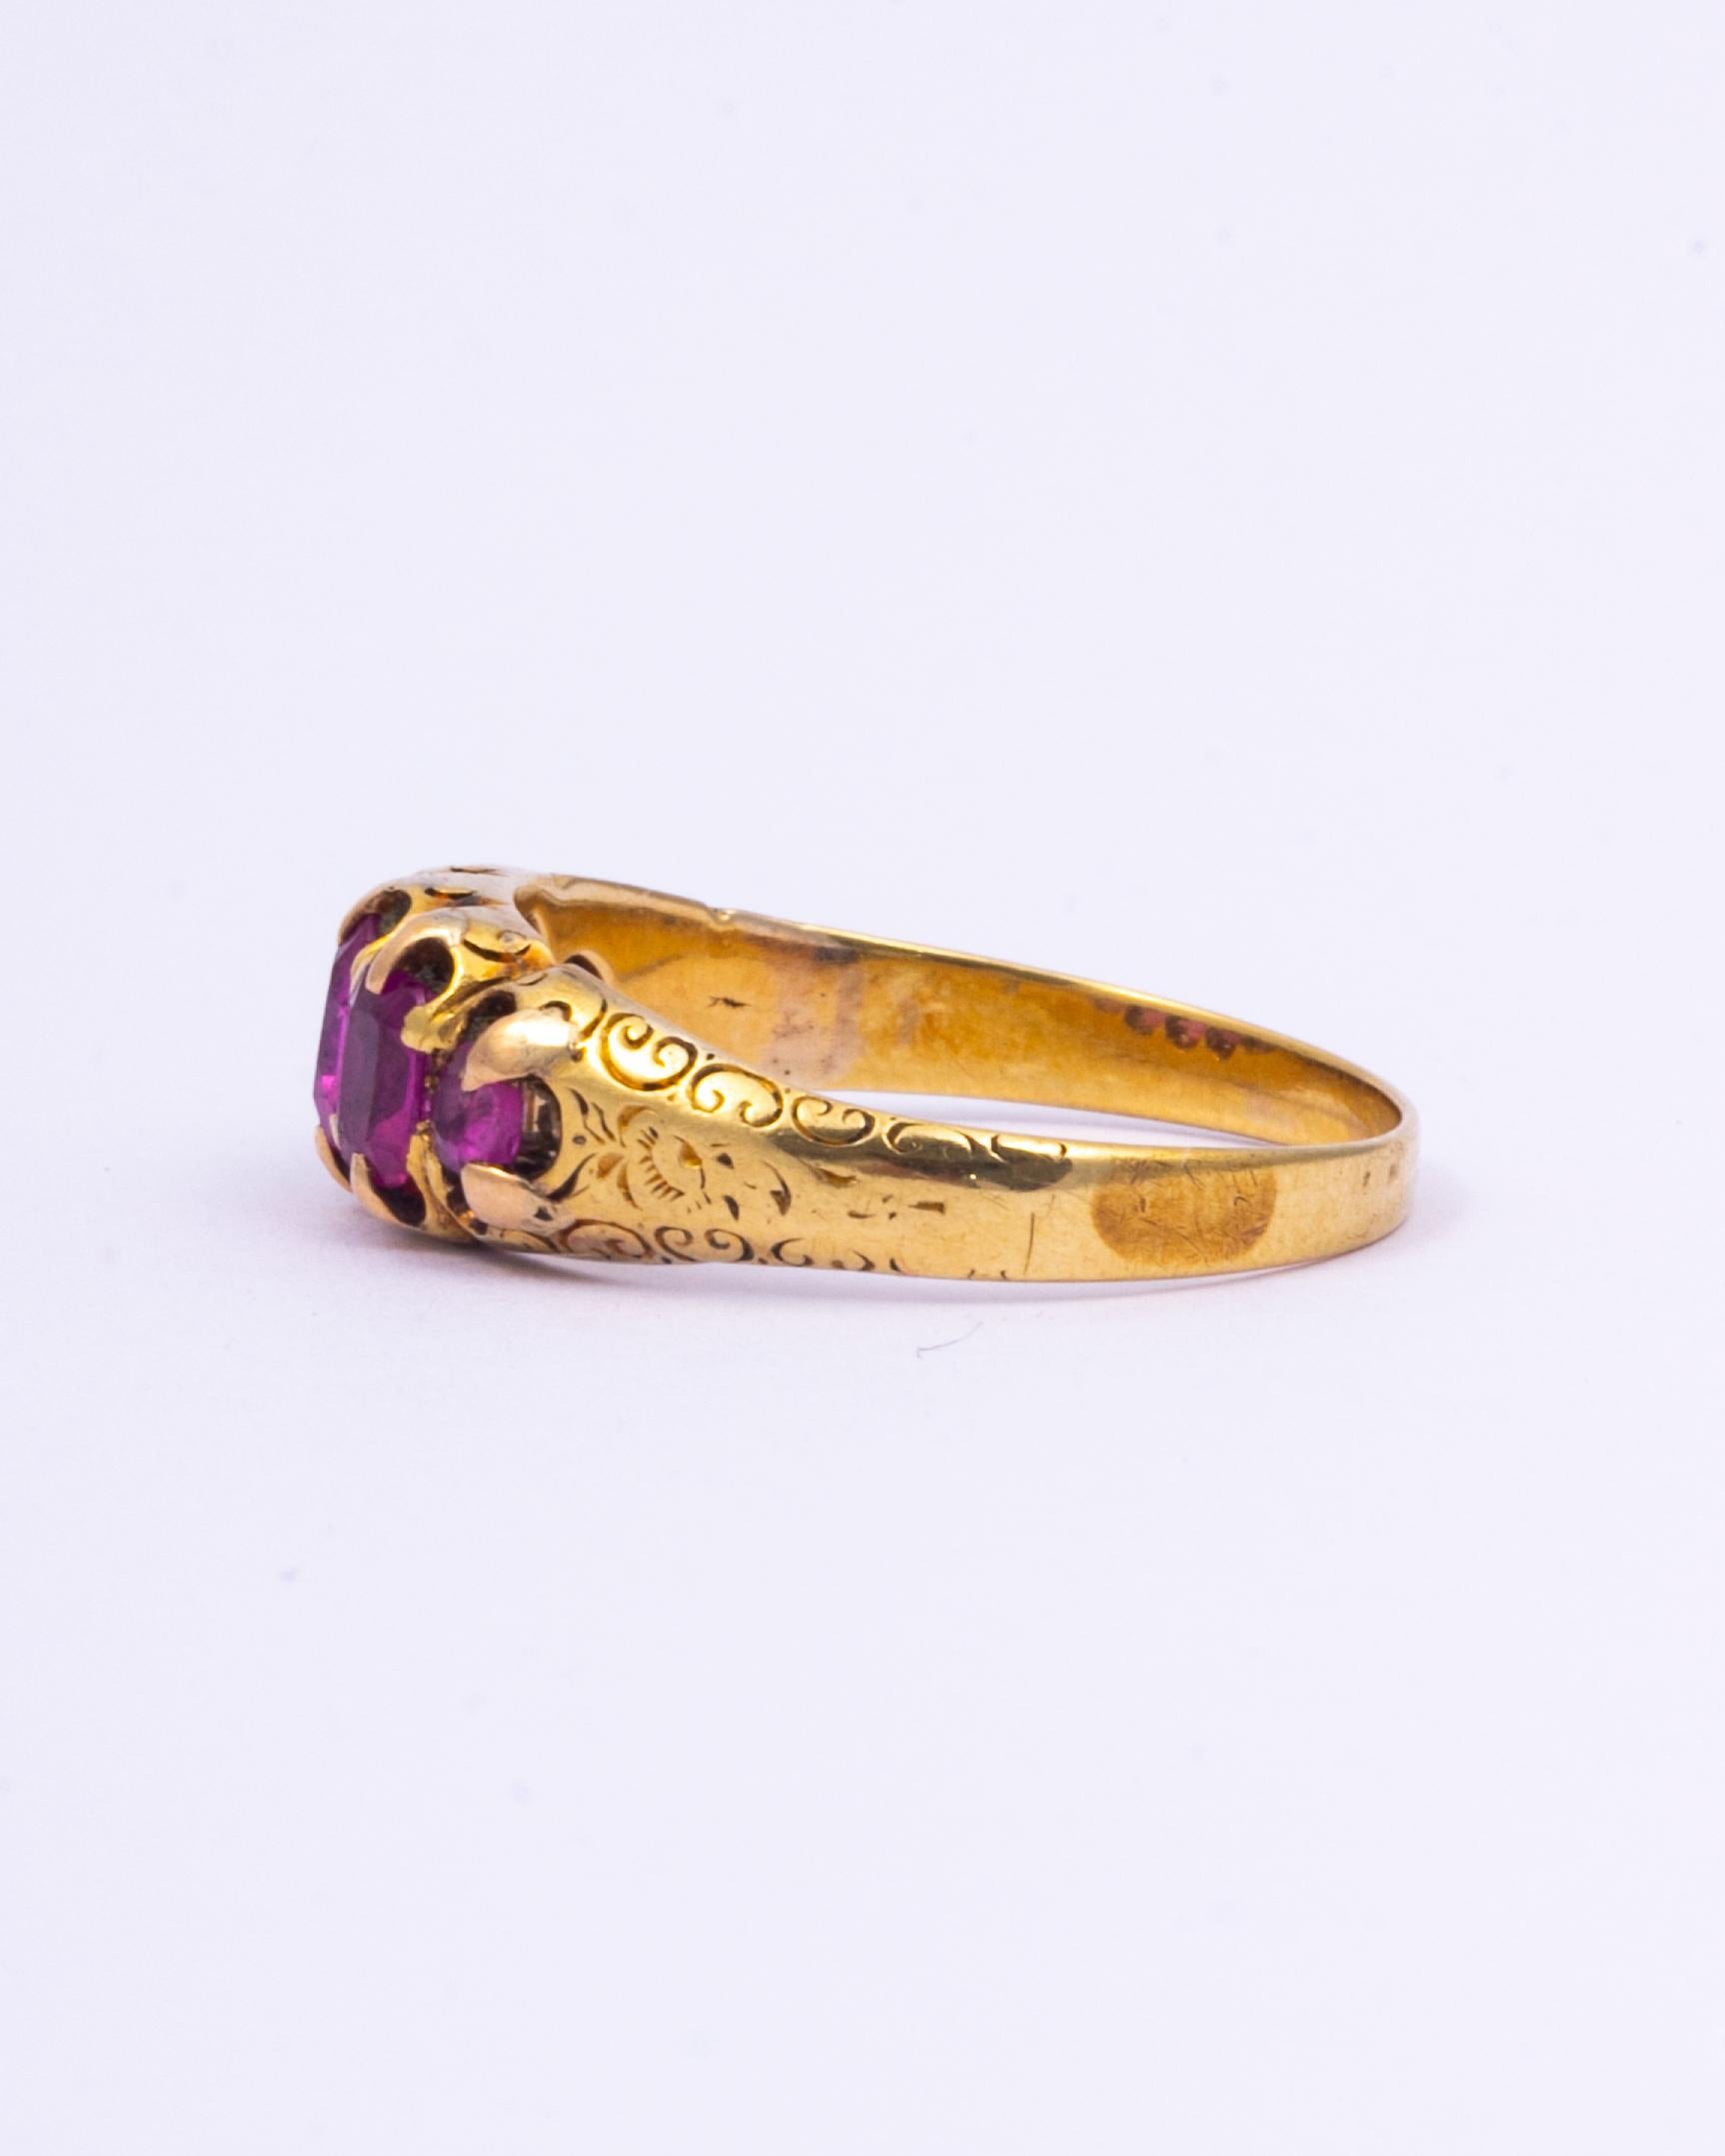 This victorian Ruby ring is adorned with five wonderful rubies set in smooth settings. All set in a beautiful 15ct Yellow Gold and has delicately engraved shoulders. A truly stunning antique ring that would make a fabulous family heirloom.

Ring